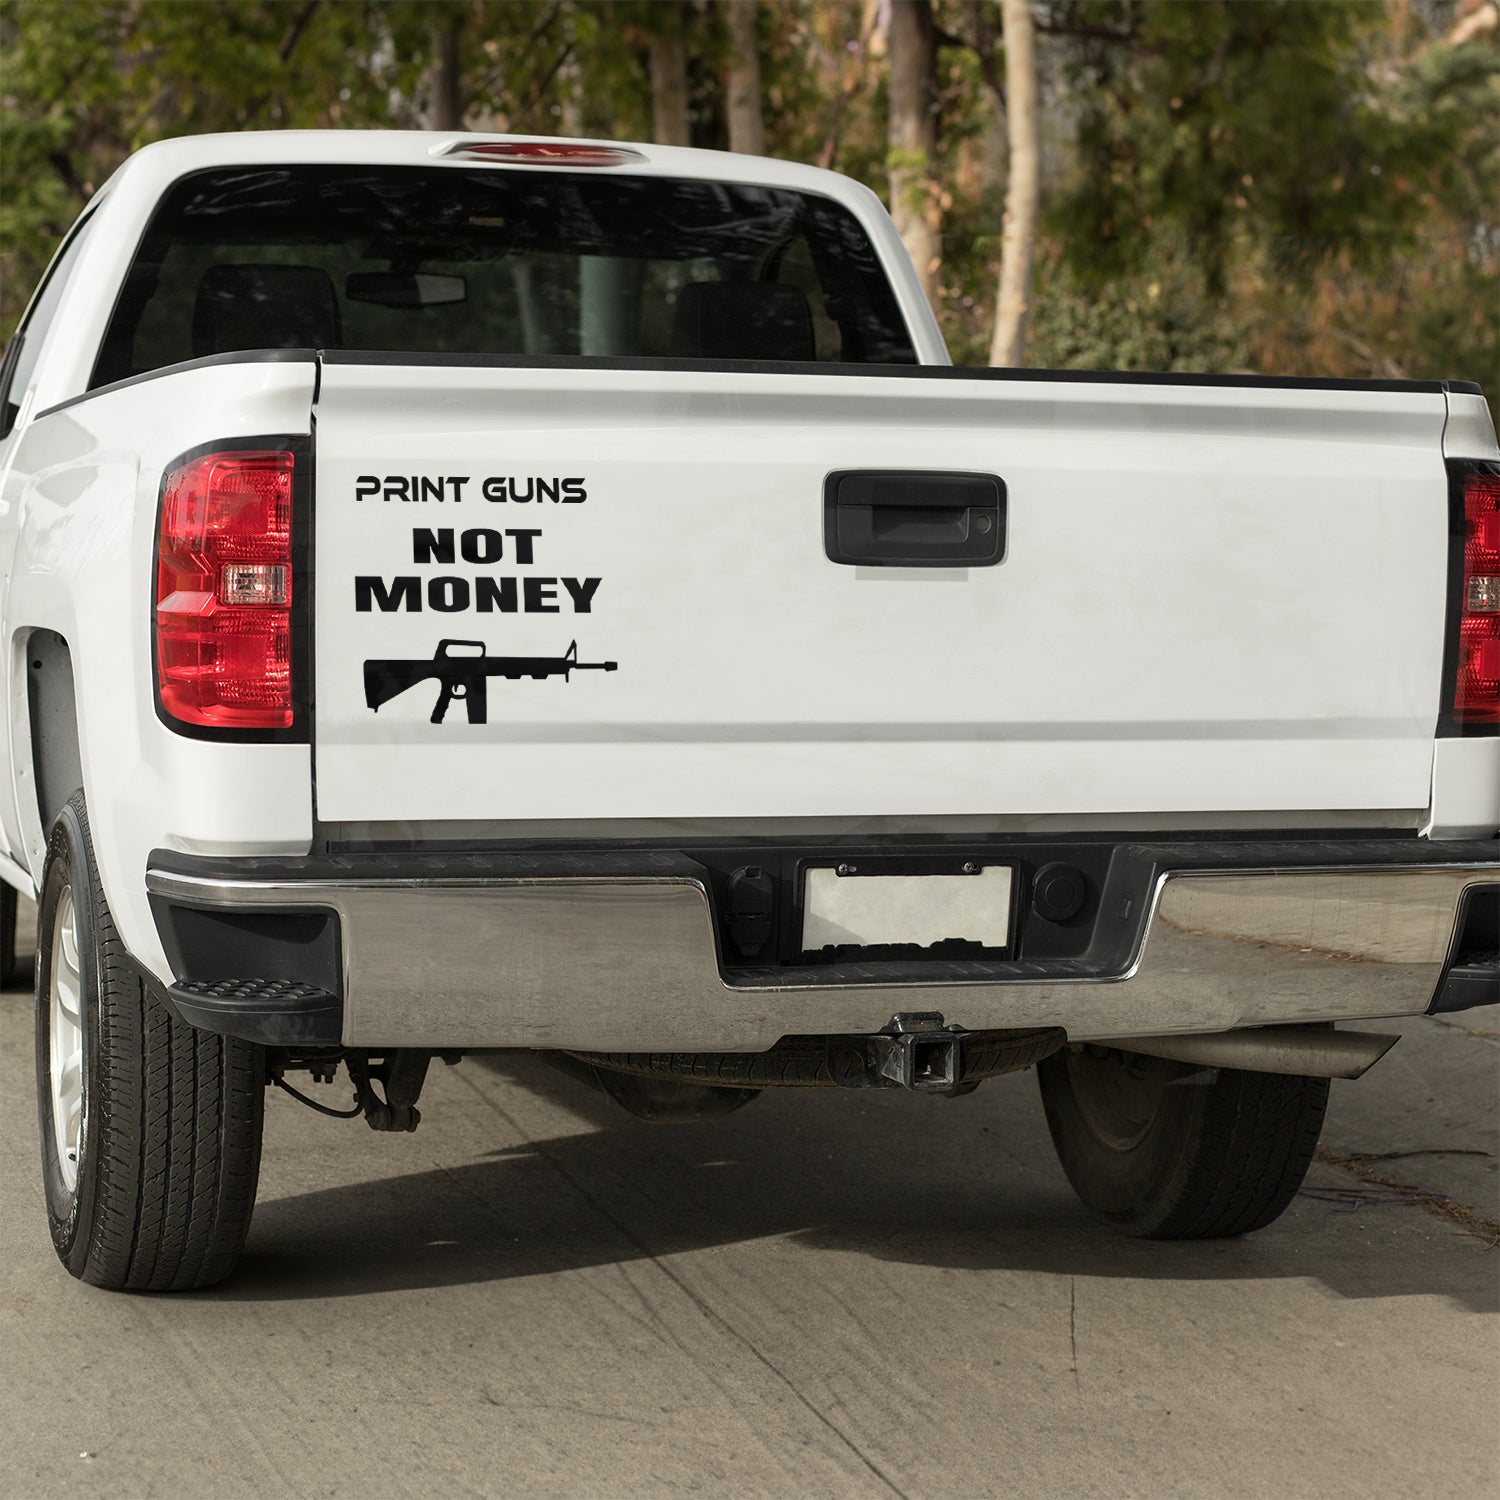 Print guns not money vinyl decal bumper humper decal stickers Decals for cars Decals for Trucks decals for tumblers liberty minivan sticker SUV decals tailgater truck decals window decal car Window decals window decor